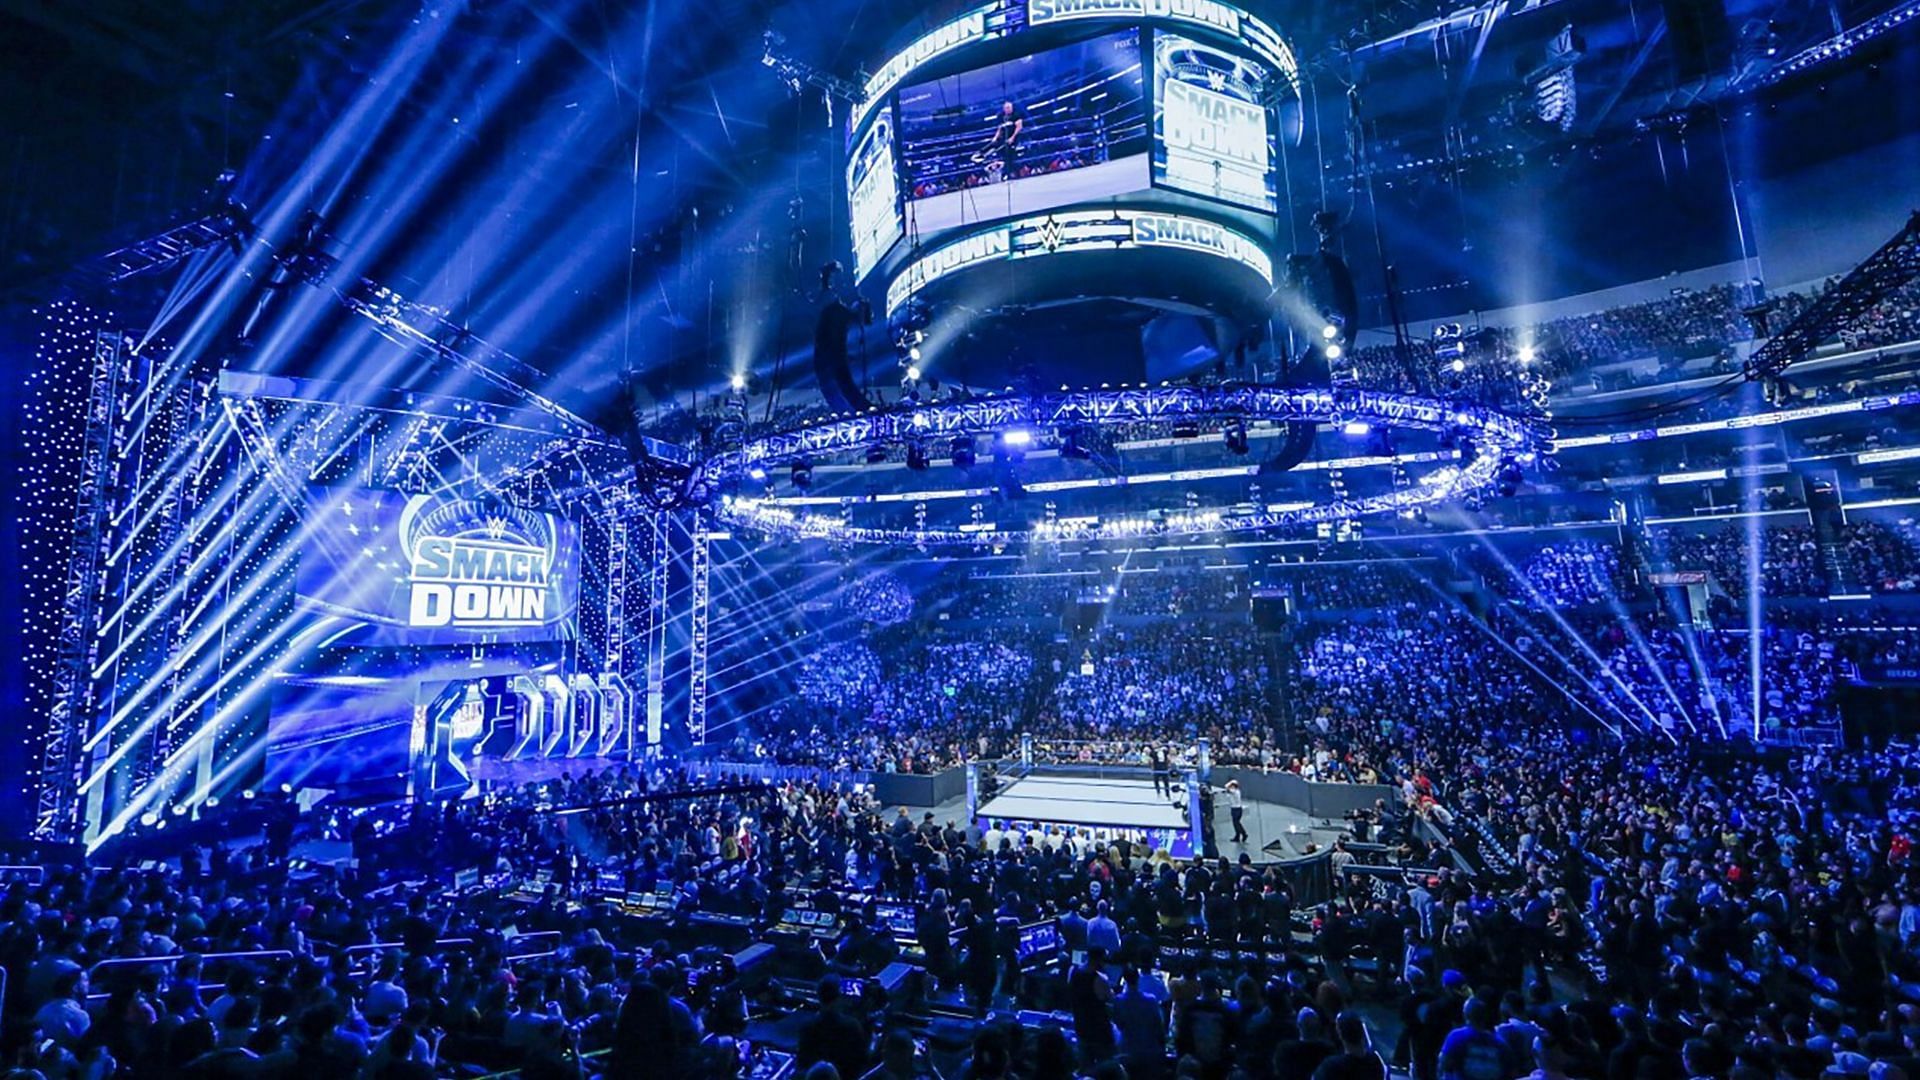 WWE Superstars wrestle in the ring at a live SmackDown